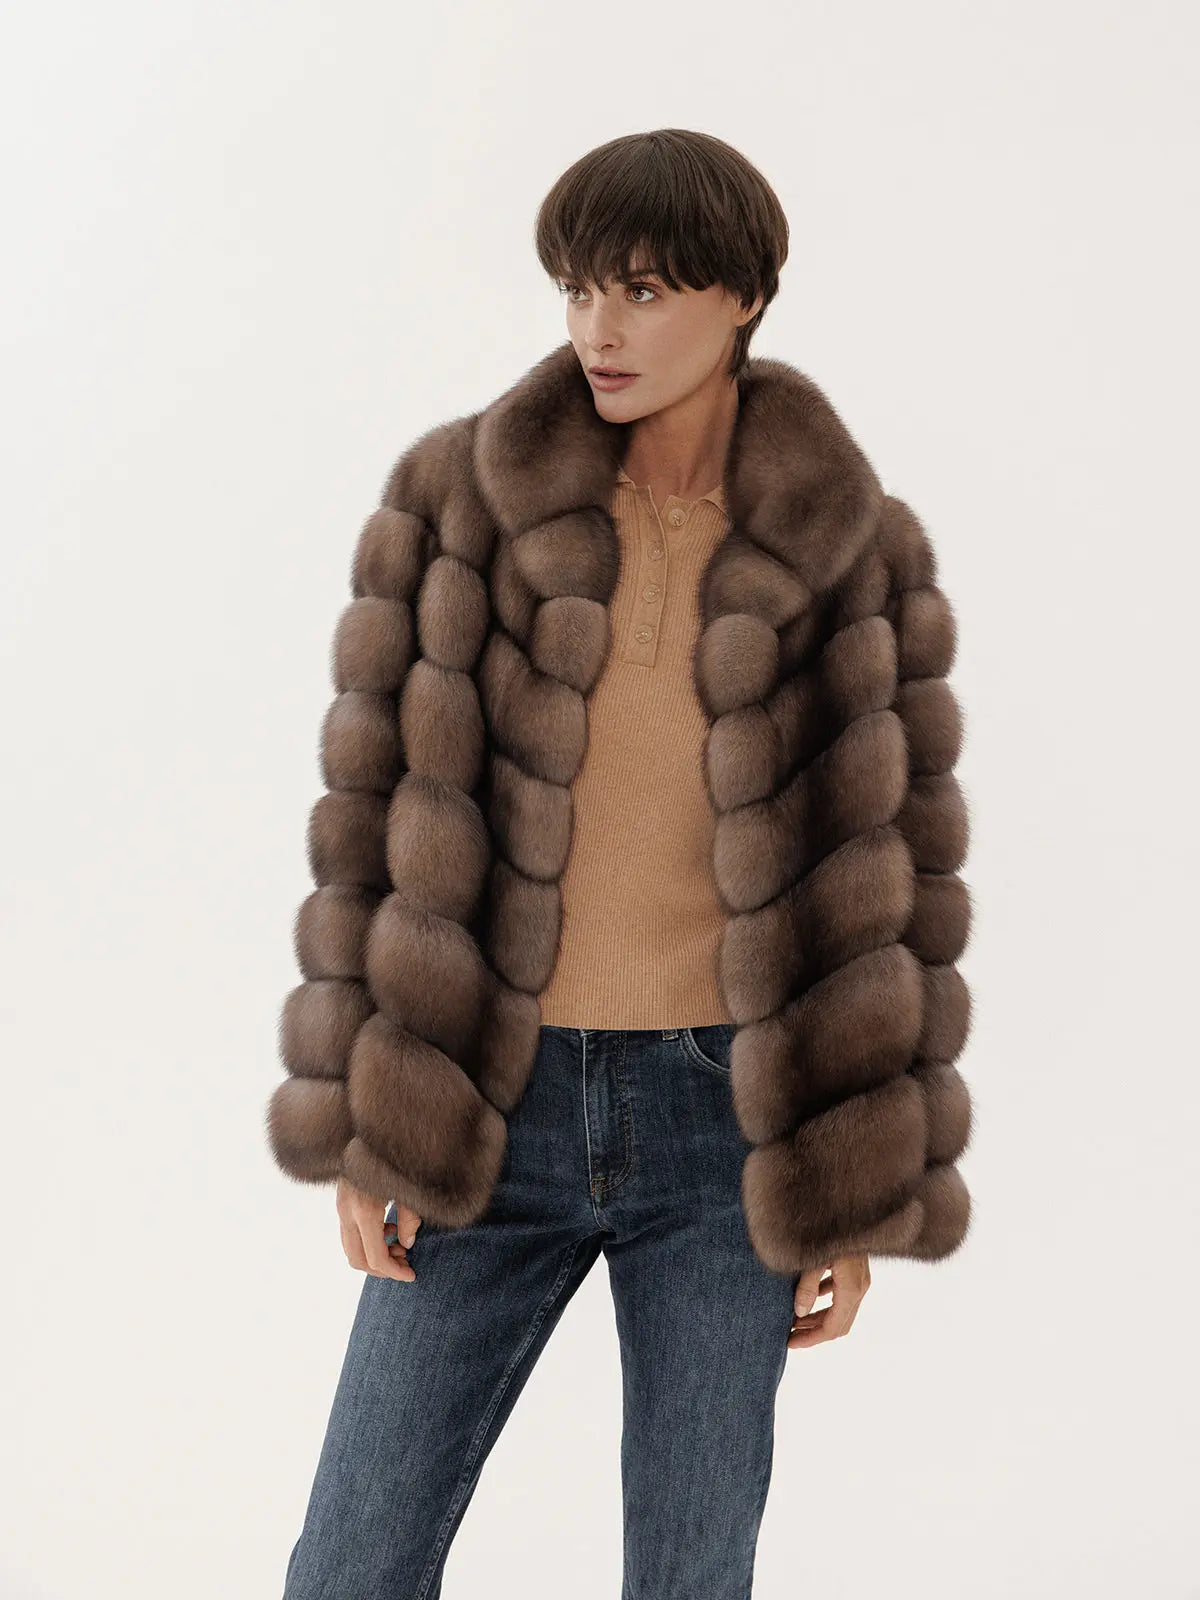 Short coat sable fur coat with stand-up collar